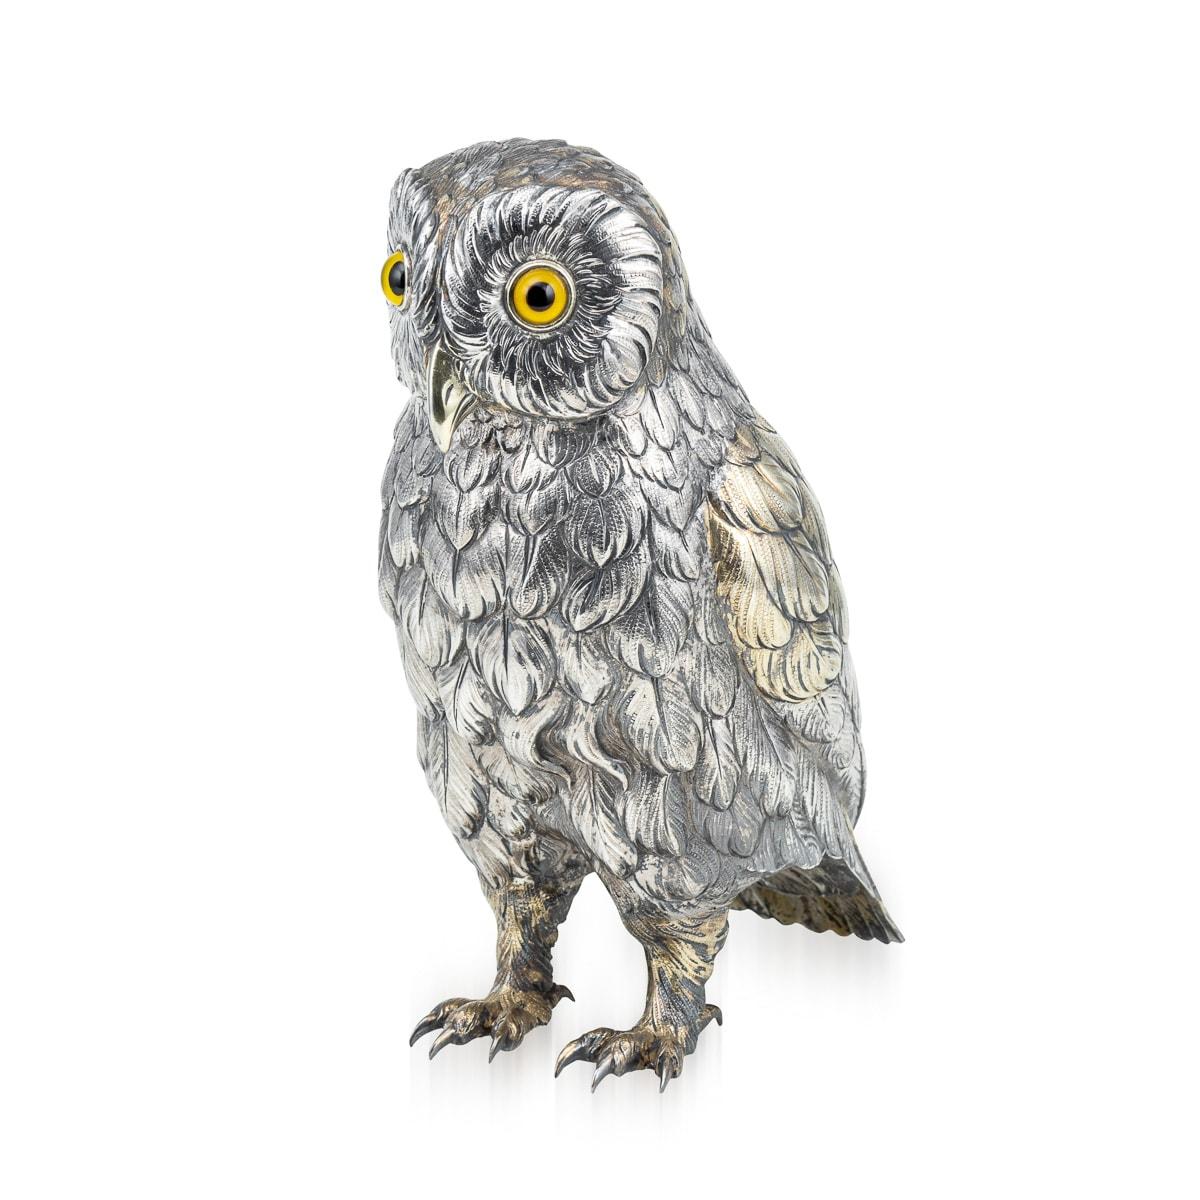 Antique 20th Century German solid silver figure of an owl. This realistically modelled bird has original set glass eyes and gilt feathers plumage. A true conversation piece, that will add novelty and fun to any household setting. Hallmarked German